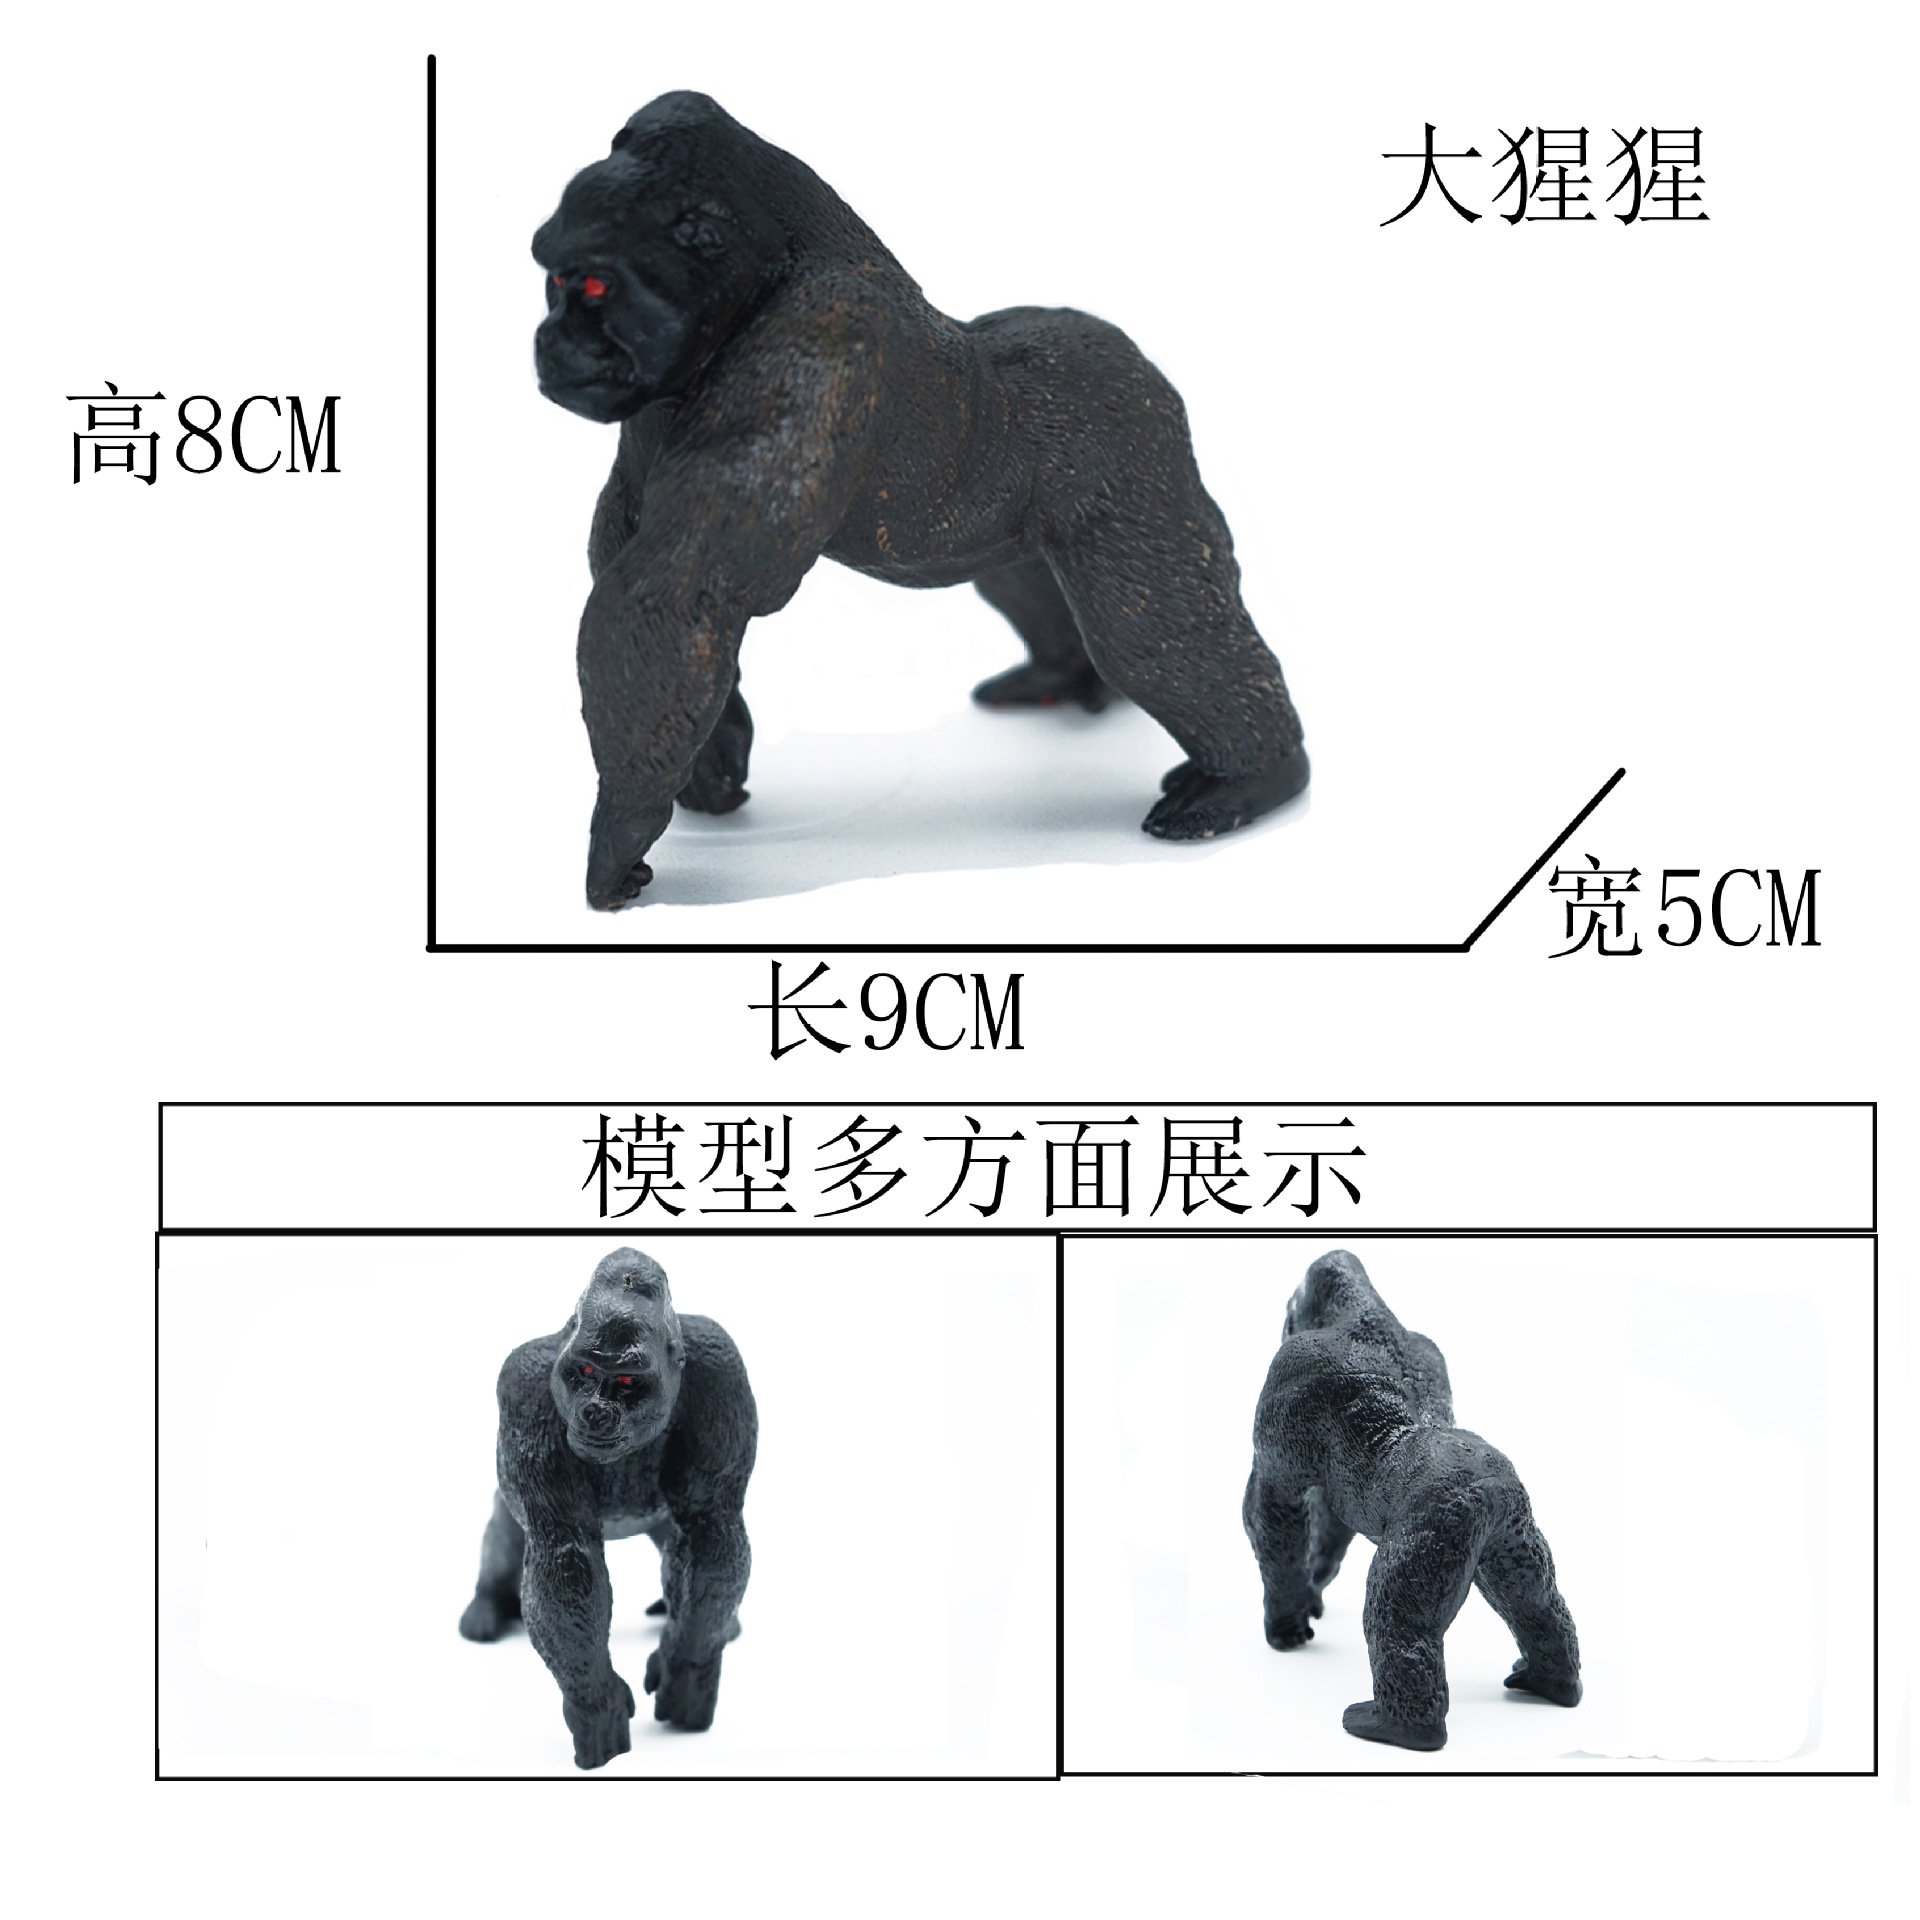 Customized Simulation Solid Animal Model Toys Realistic Lion Tiger Farm Poultry Dinosaur Toy Set